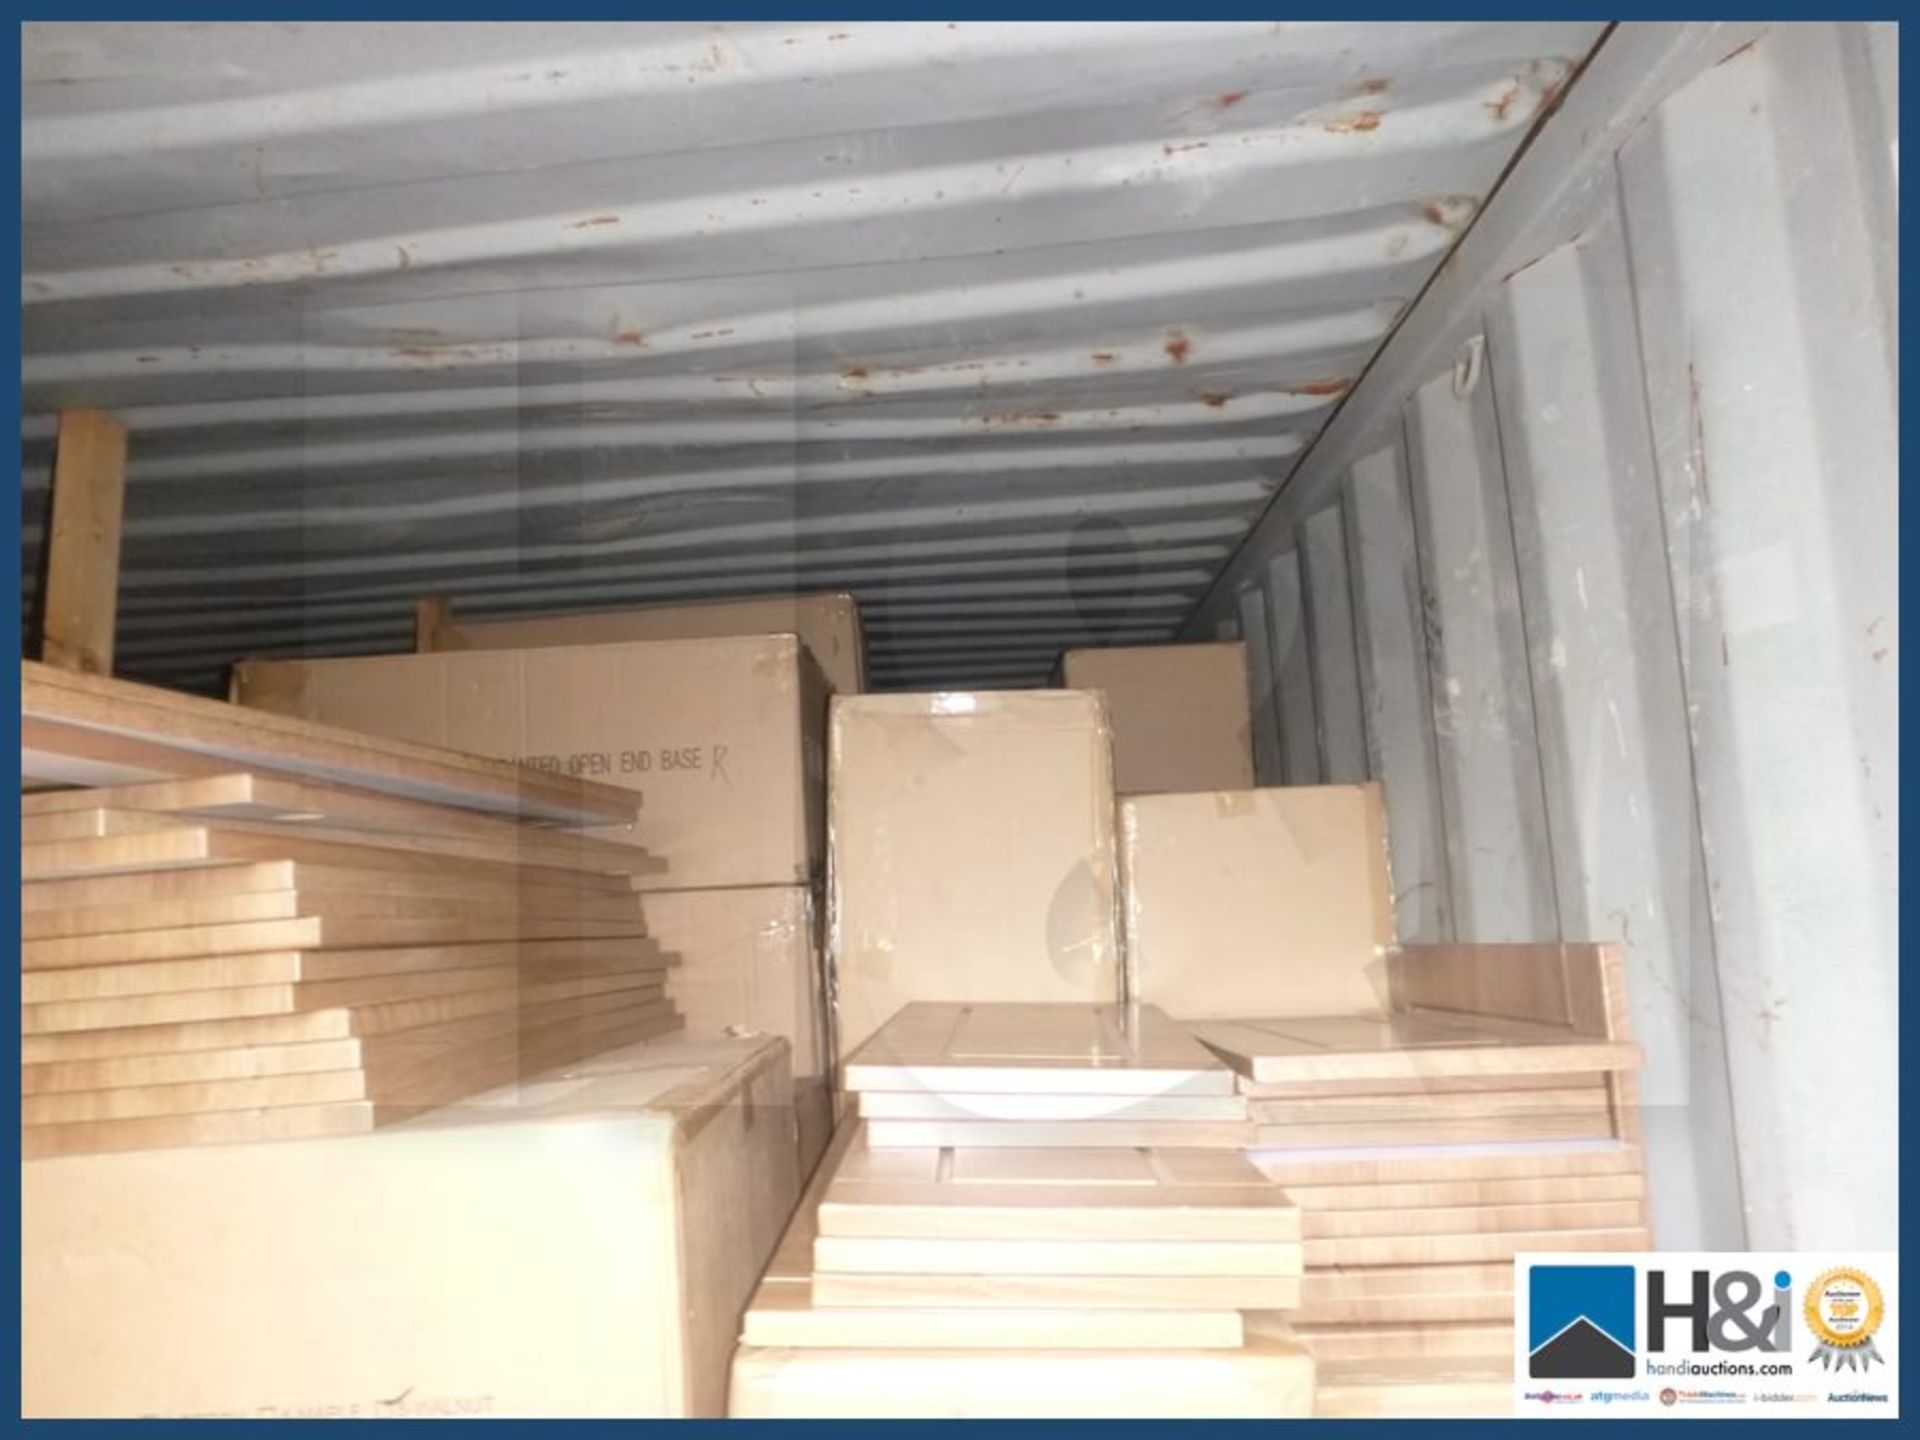 20ft shipping container dry and wind tight and contents that include a massive quantity of kitchen - Image 4 of 4